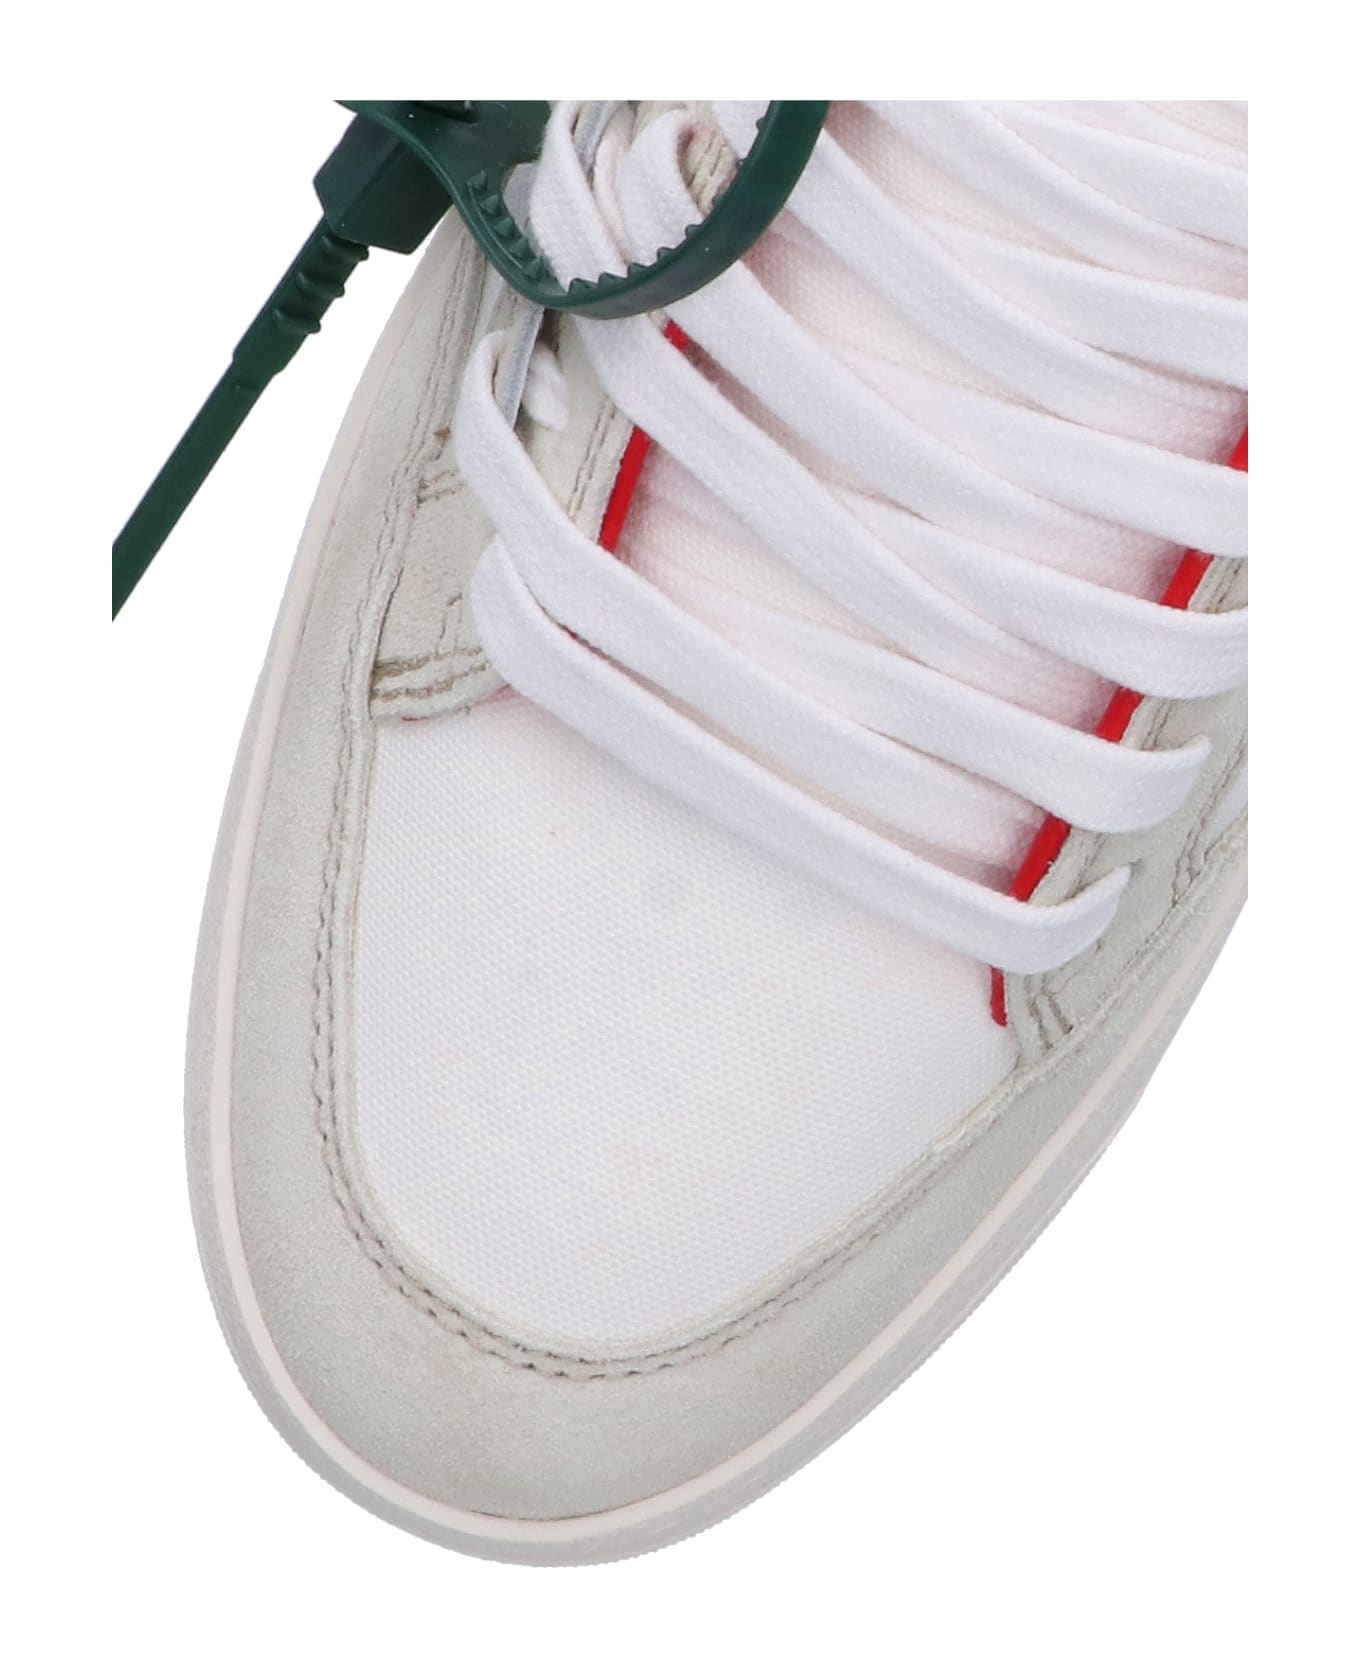 Off-White '5.0 Off Court' Sneakers - White